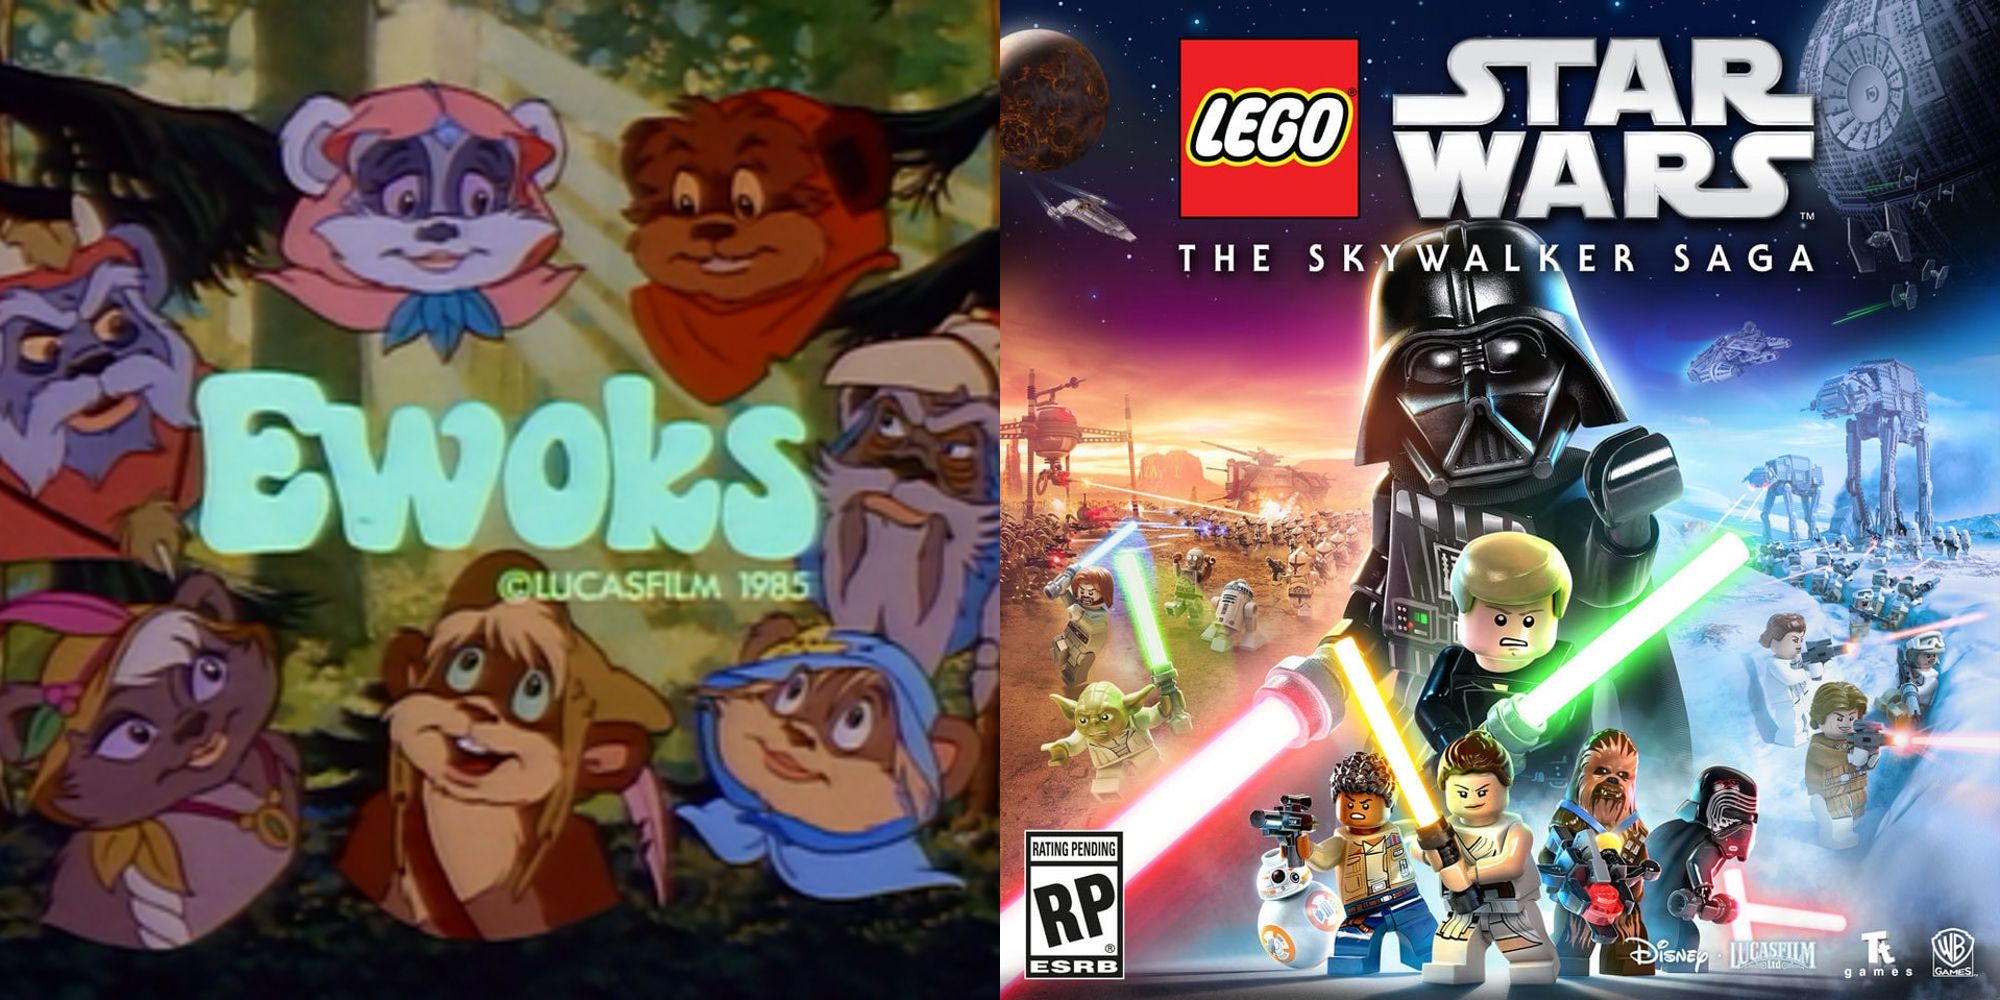 LEGO Star Wars References The Animated Ewoks Show You Want To Forget Ewoks Poster and LEGO Poster